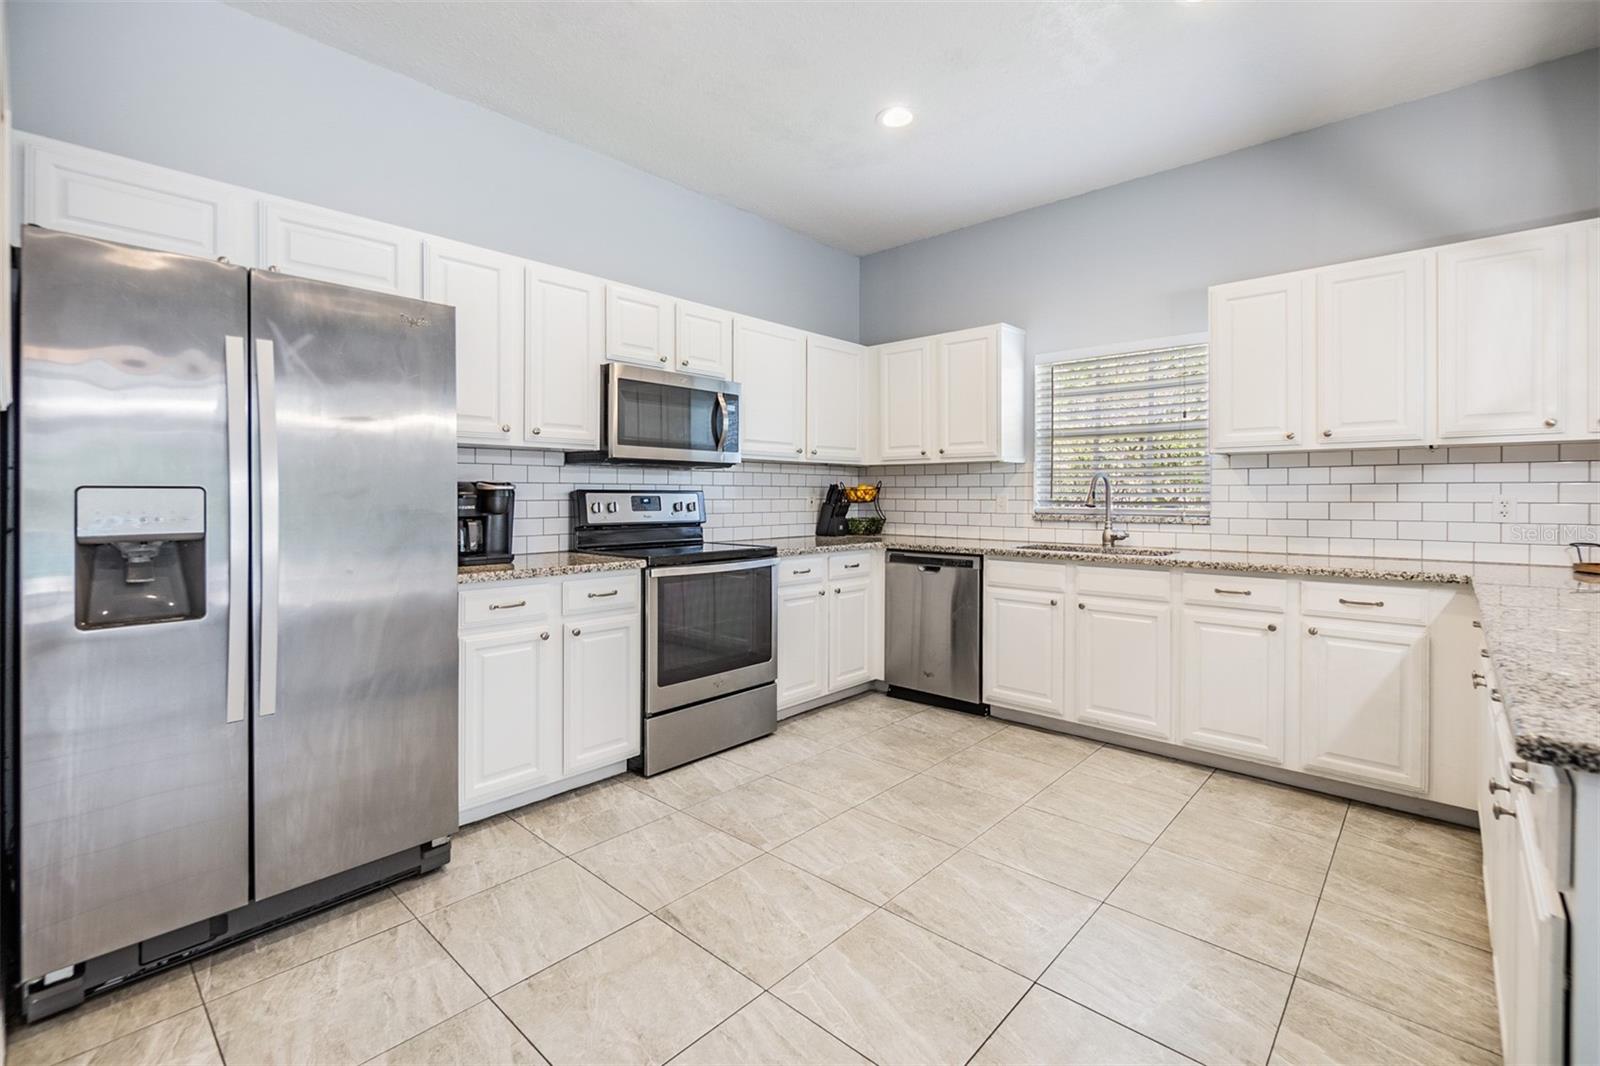 Large and Open kitchen with new light fixture, inset lighting,  Subway tile backsplash, Granite Countertops, and Stainless Steel appliances.